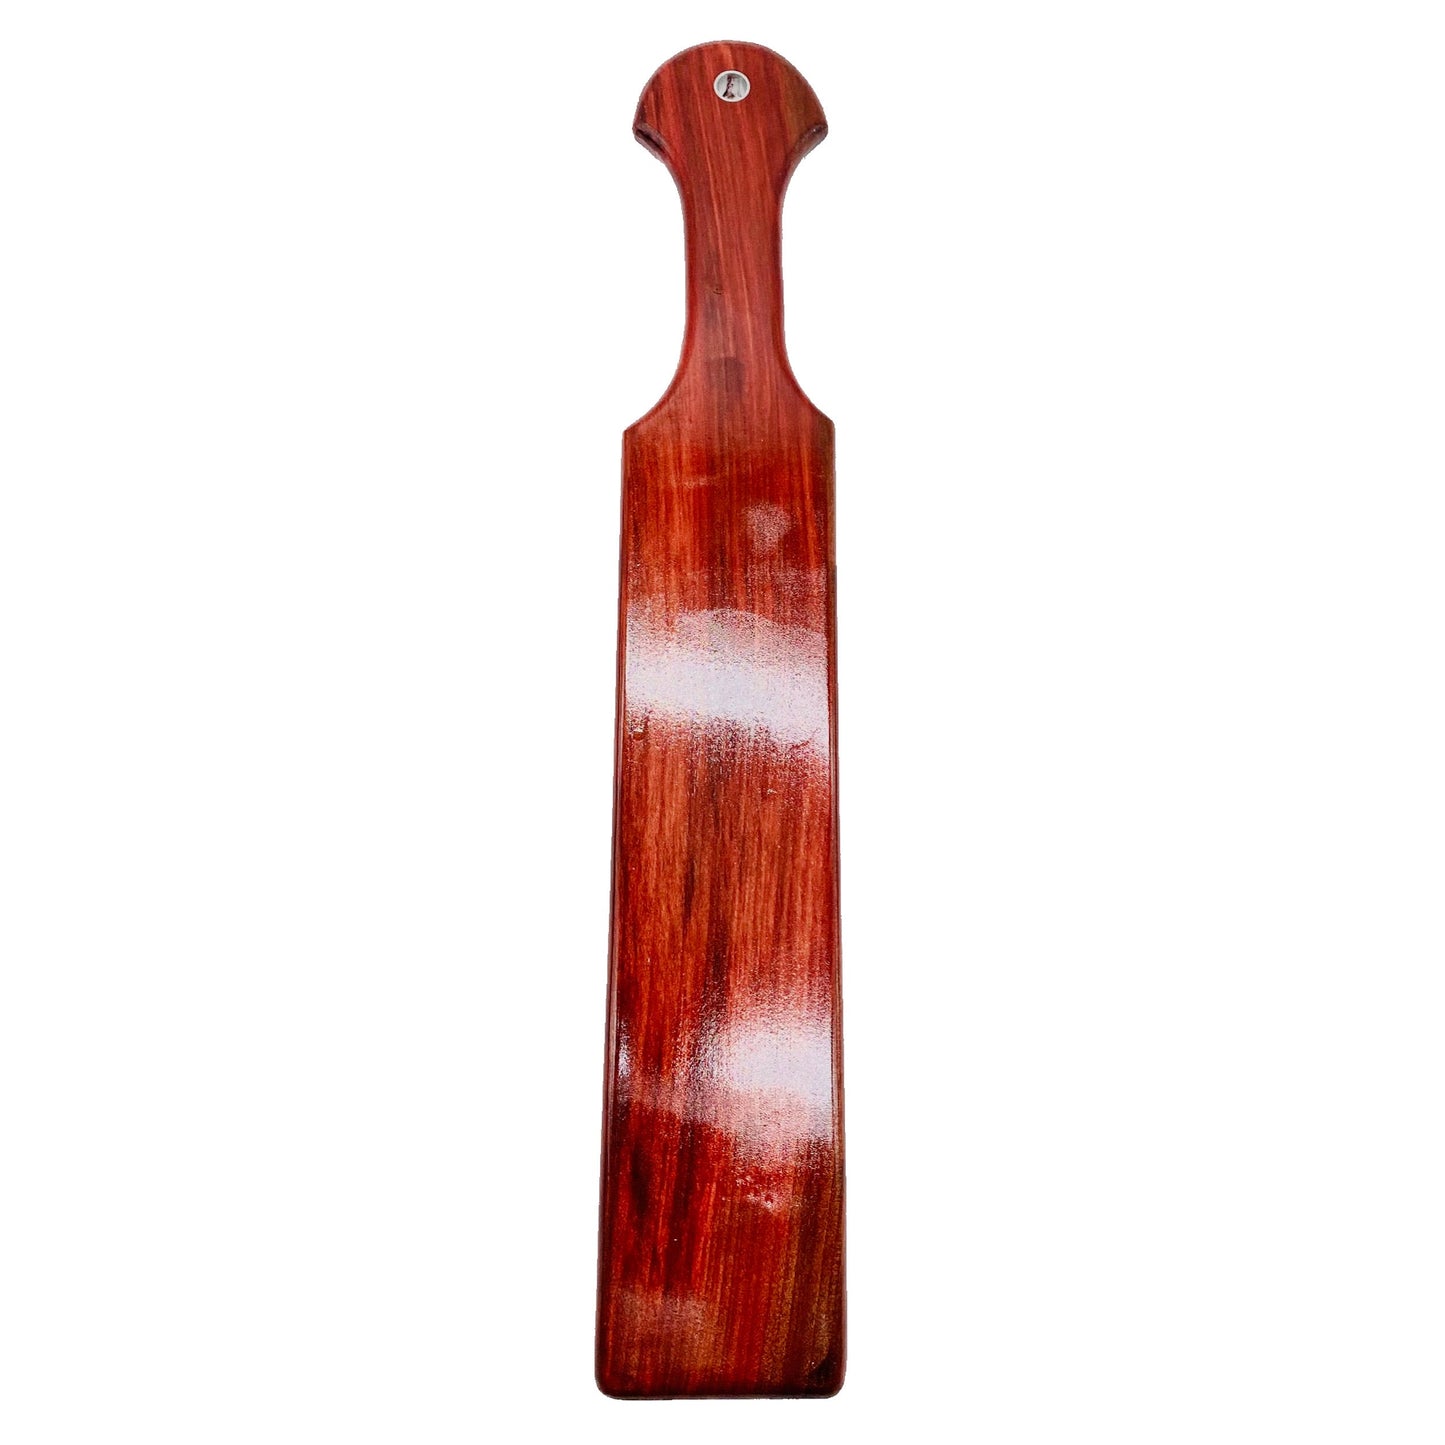 Master Control's Woodshop & Toys's 22" Long Wooden Spanking Paddle - This is a Handmade upon order product. The product usually takes 7-10 days to create. This Long Wooden Spanking Paddle never fails to get an "ouch" of appreciation! Available in several